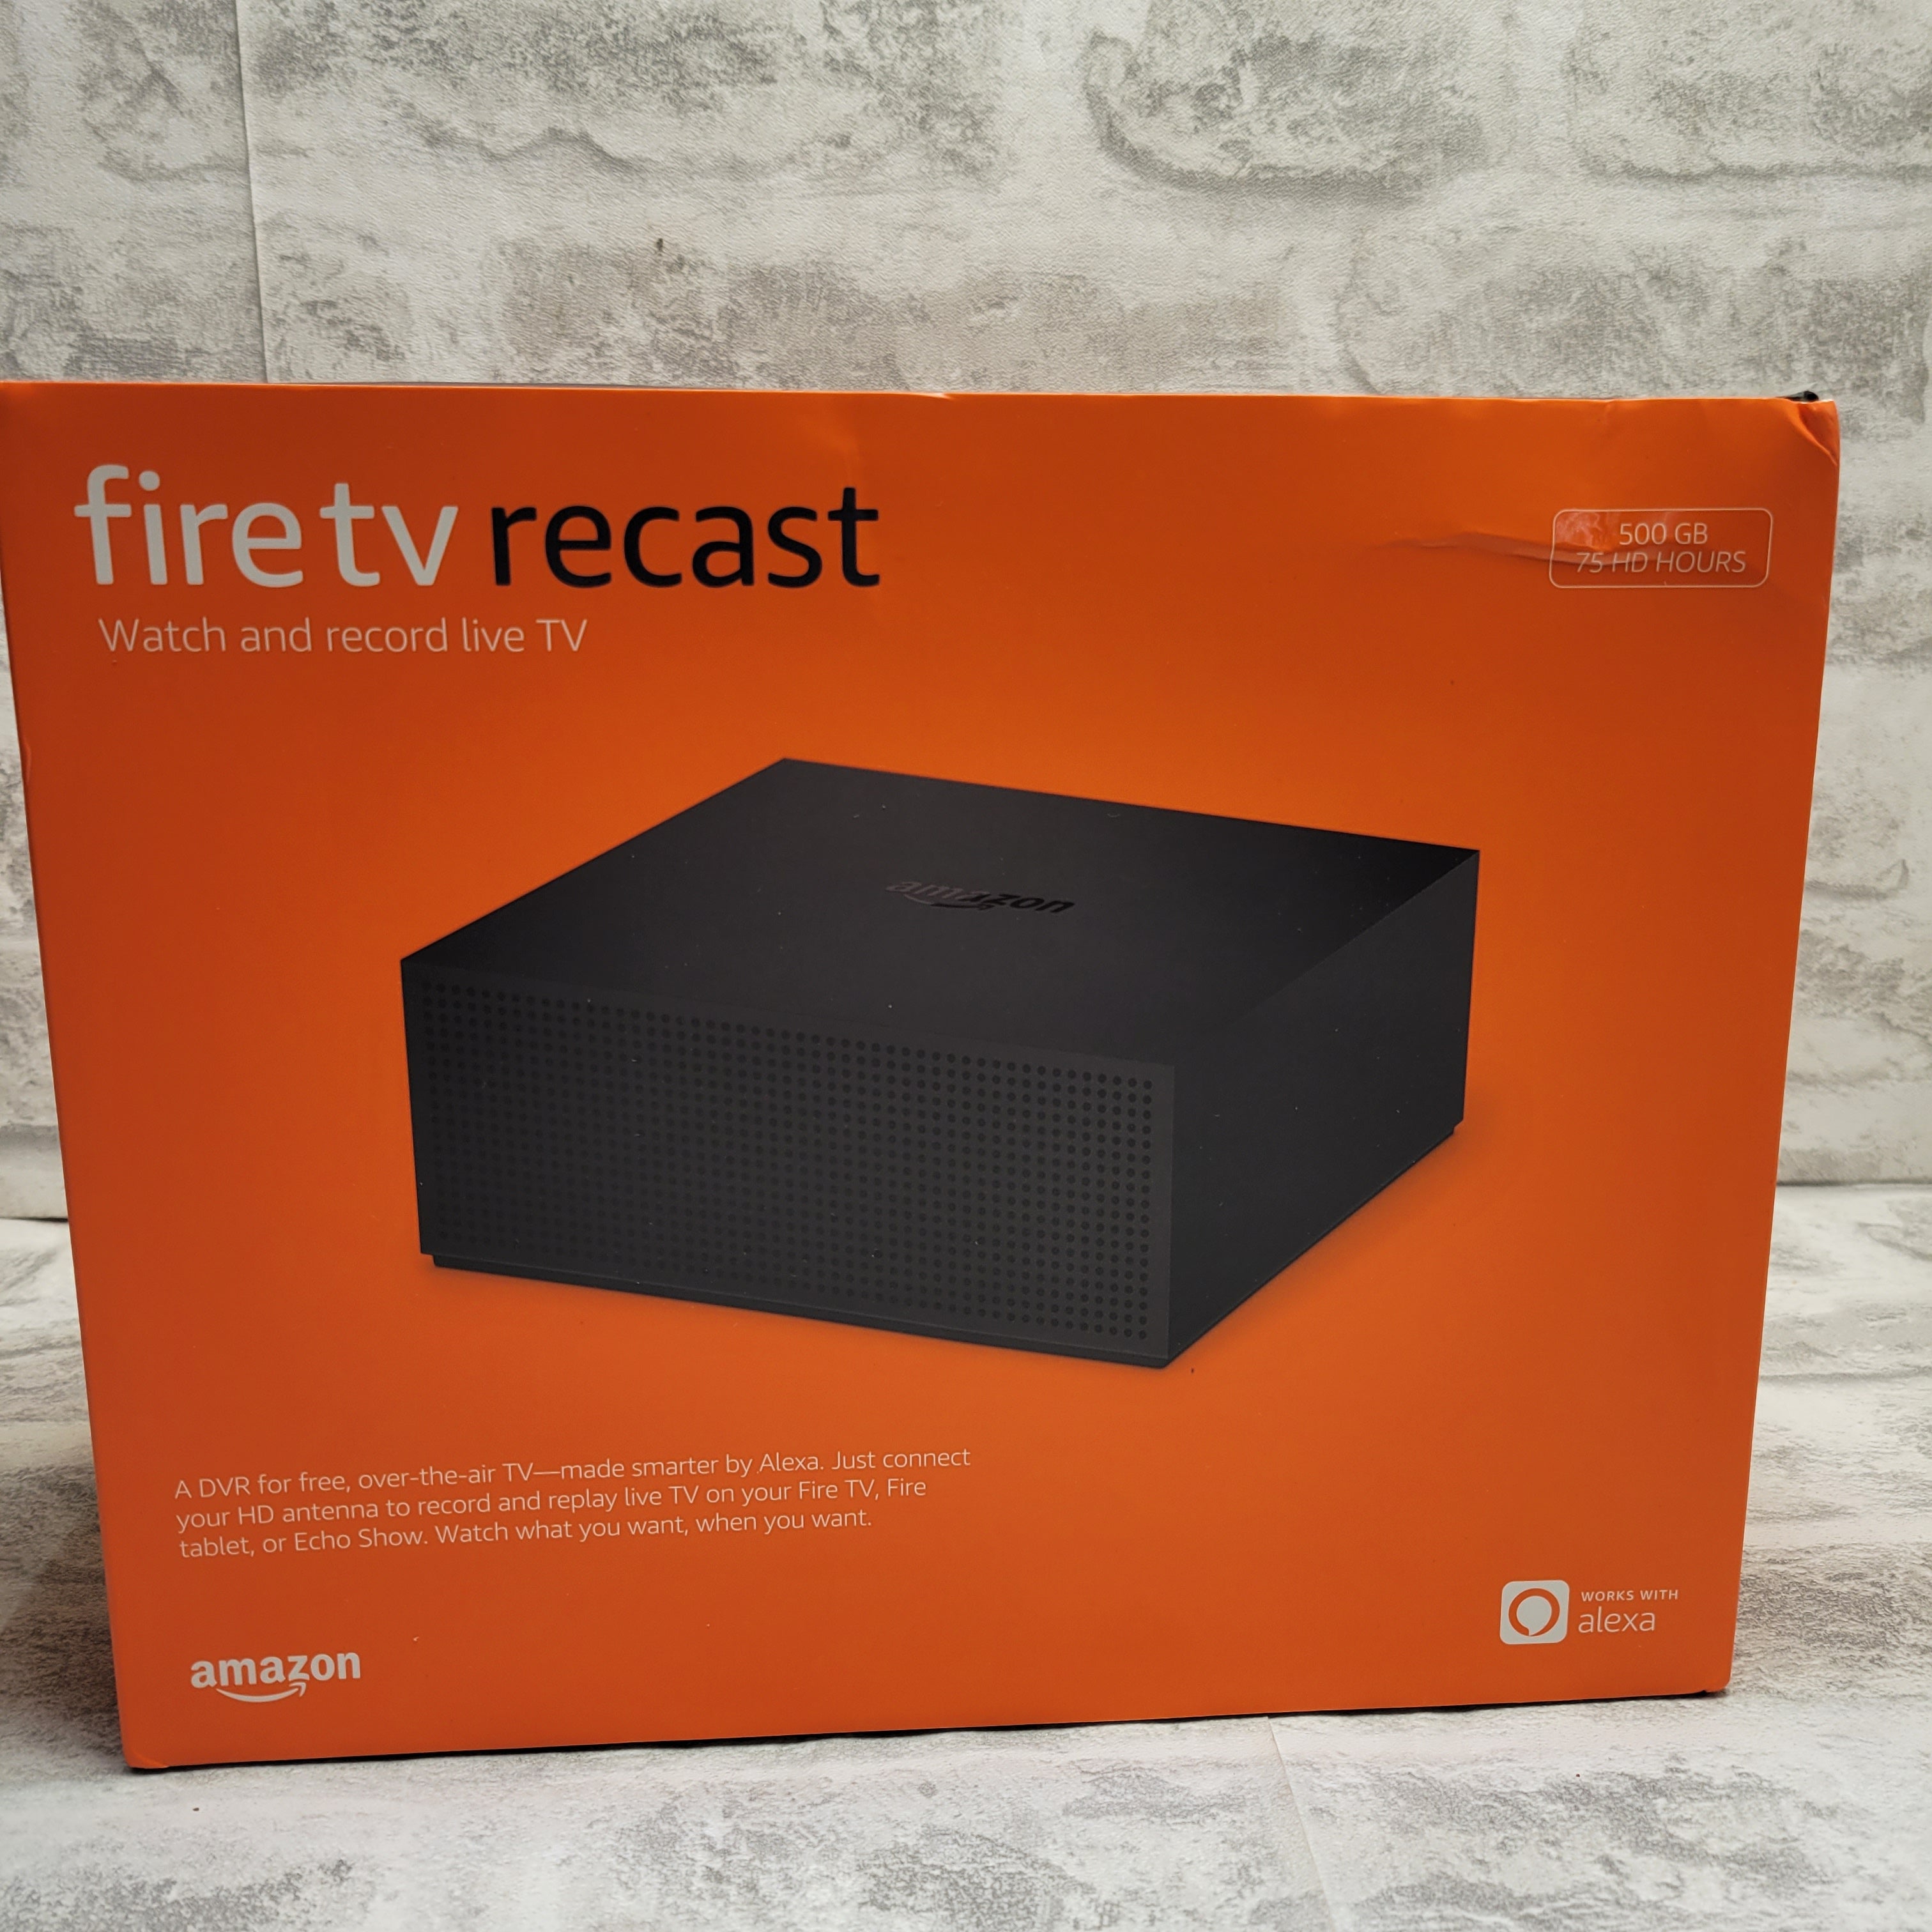 Fire TV Recast, over-the-air DVR, 500 GB, 75 hours, DVR for cord cutters (7856421109998)